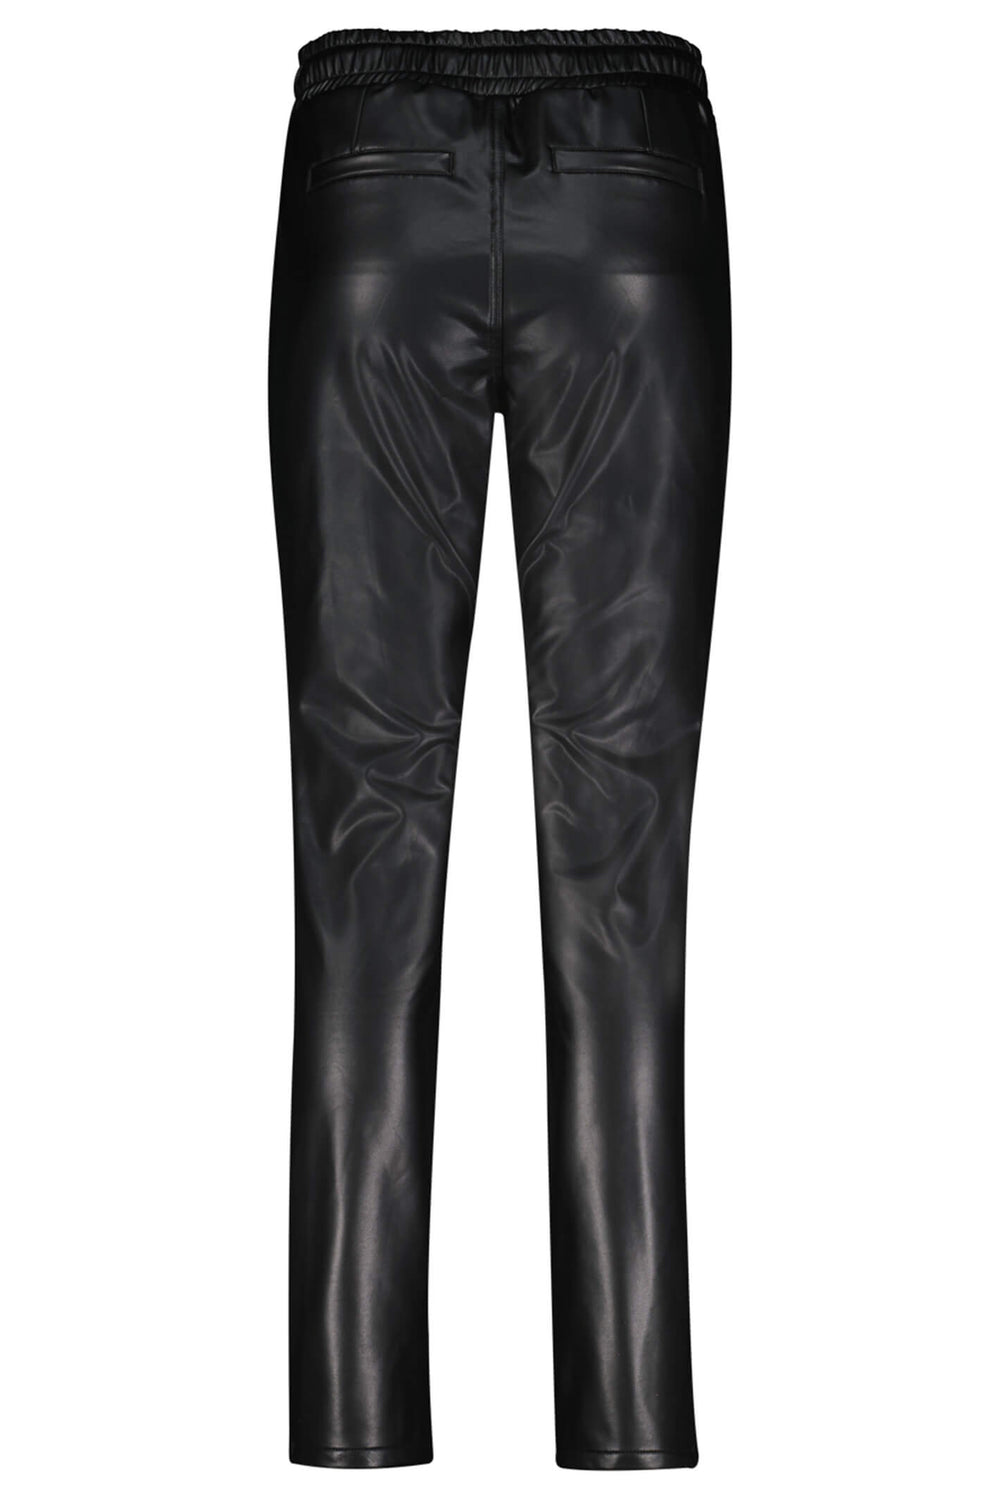 Red Button SRB4094 Tessy Black Faux Leather Trousers - Olivia Grace Fashion